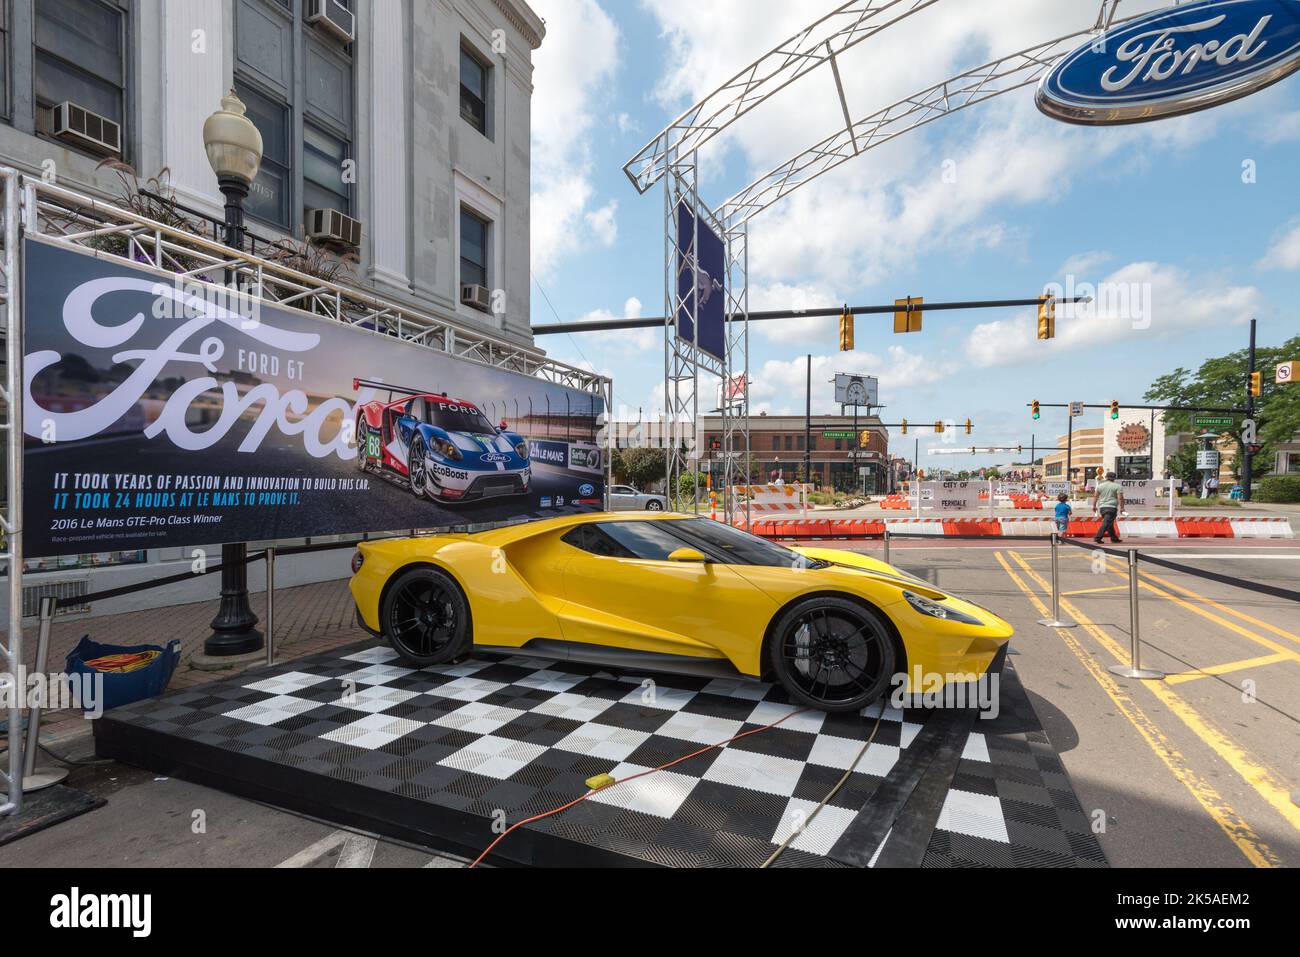 FERNDALE, MI/USA - AUGUST 19, 2016: A 2016 Ford GT car under a Le Mans banner at 'Mustang Alley', Woodward Dream Cruise. Stock Photo